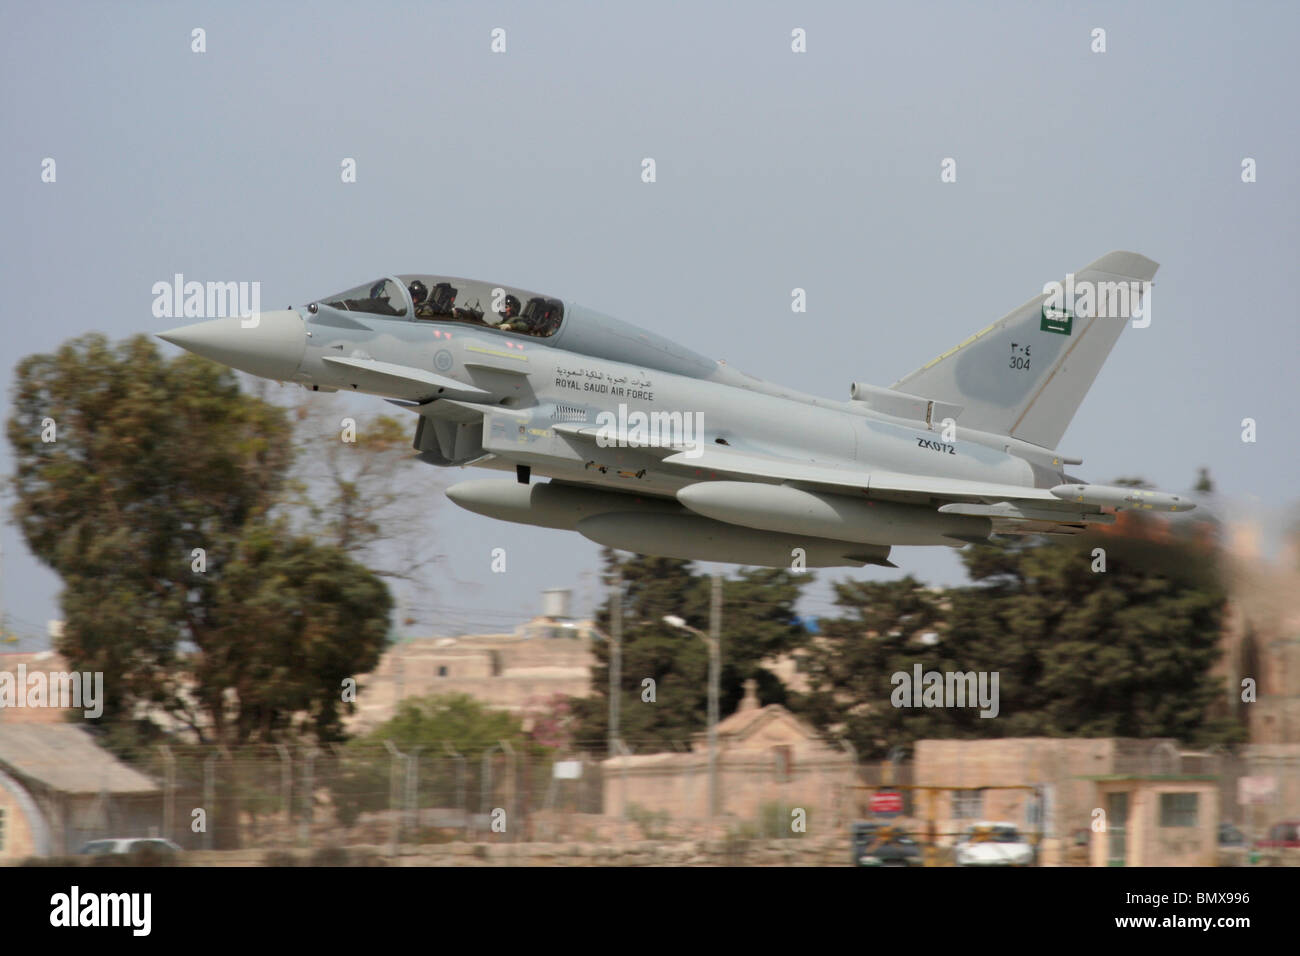 Royal Saudi Air Force Eurofighter Typhoon military fighter jet aircraft taking off Stock Photo